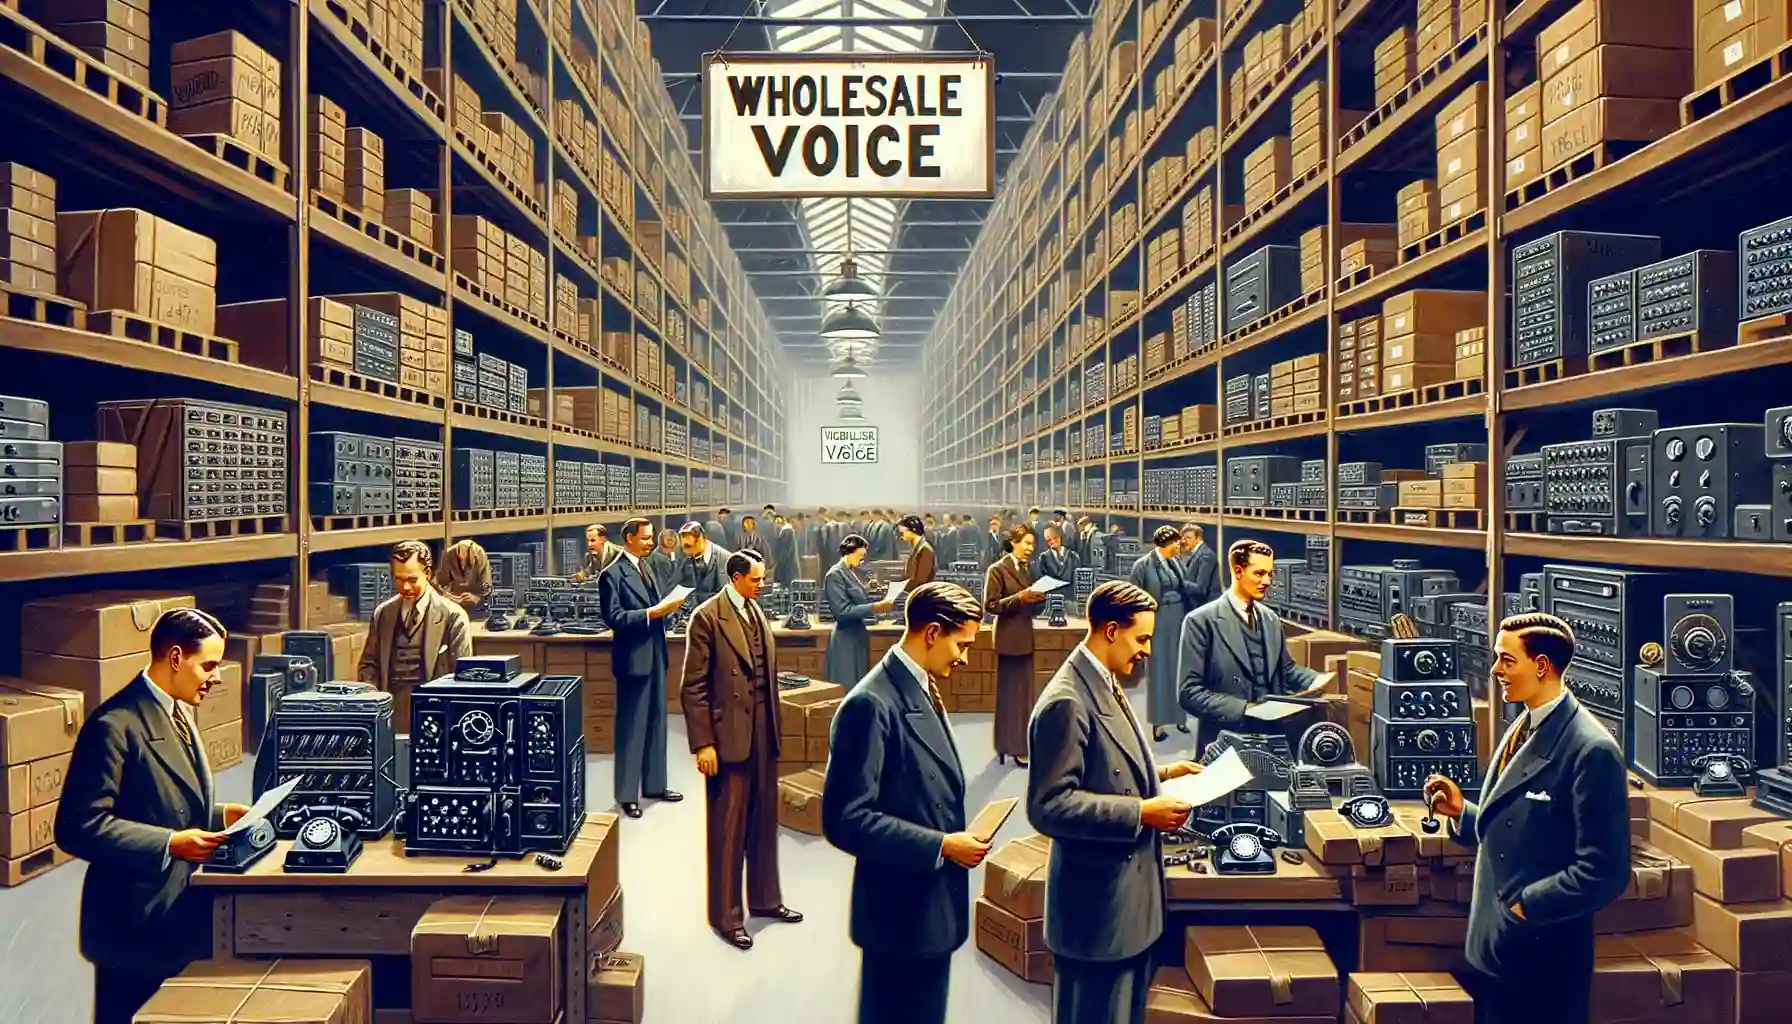 What is wholesale voice?